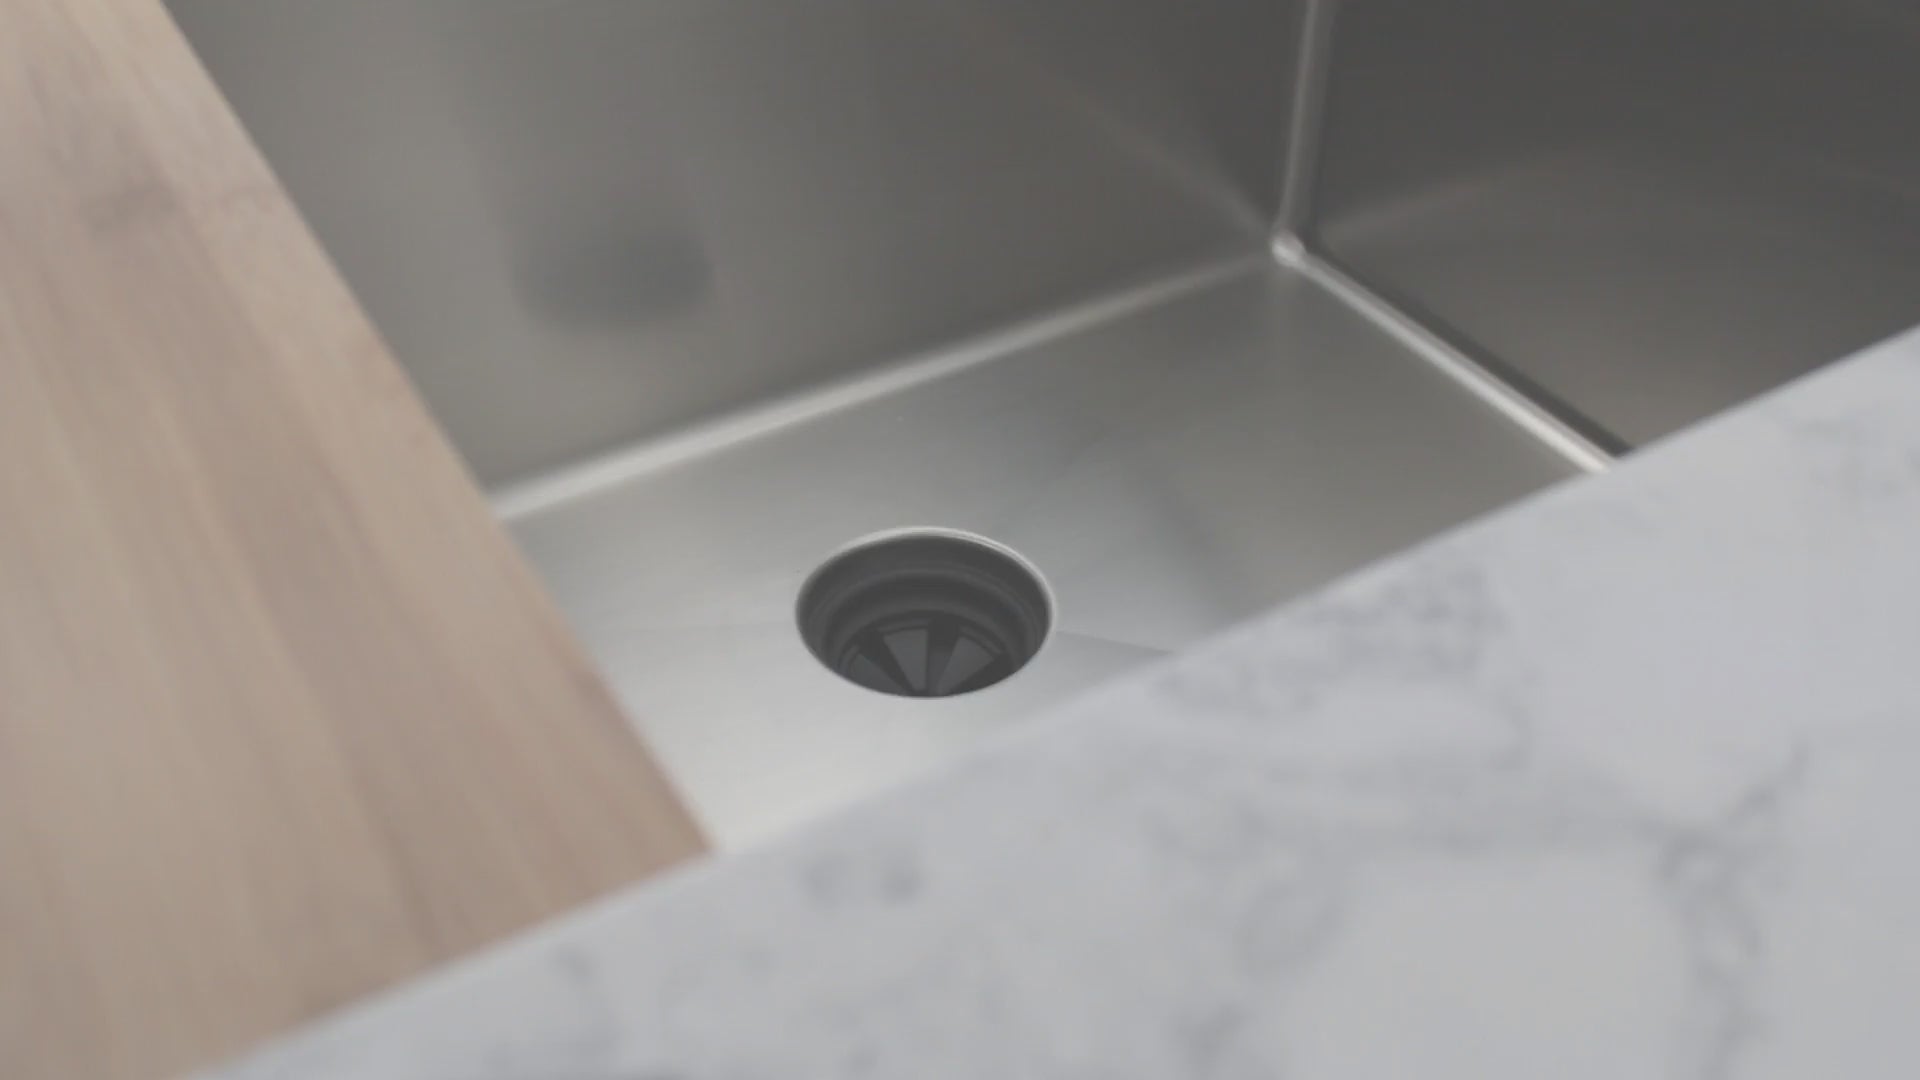 New Video explanation of Create Good Sinks' Seamless Drain